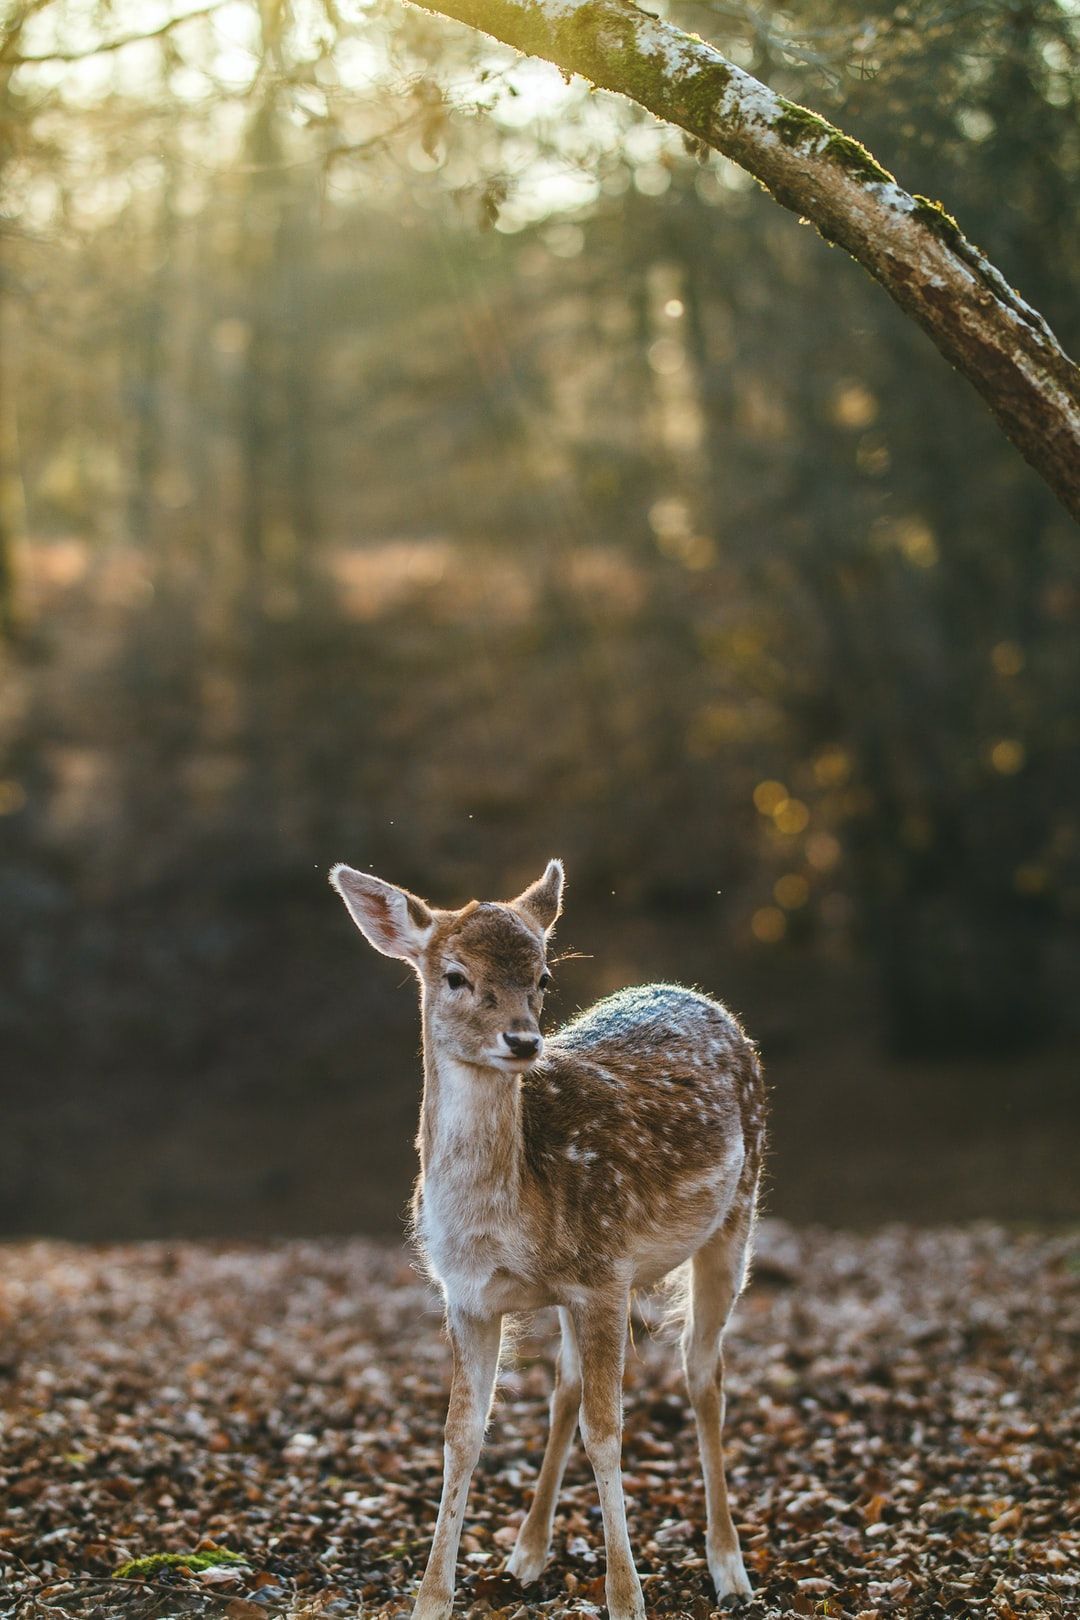 A deer standing in the woods with the sun shining through the trees behind it. - Deer